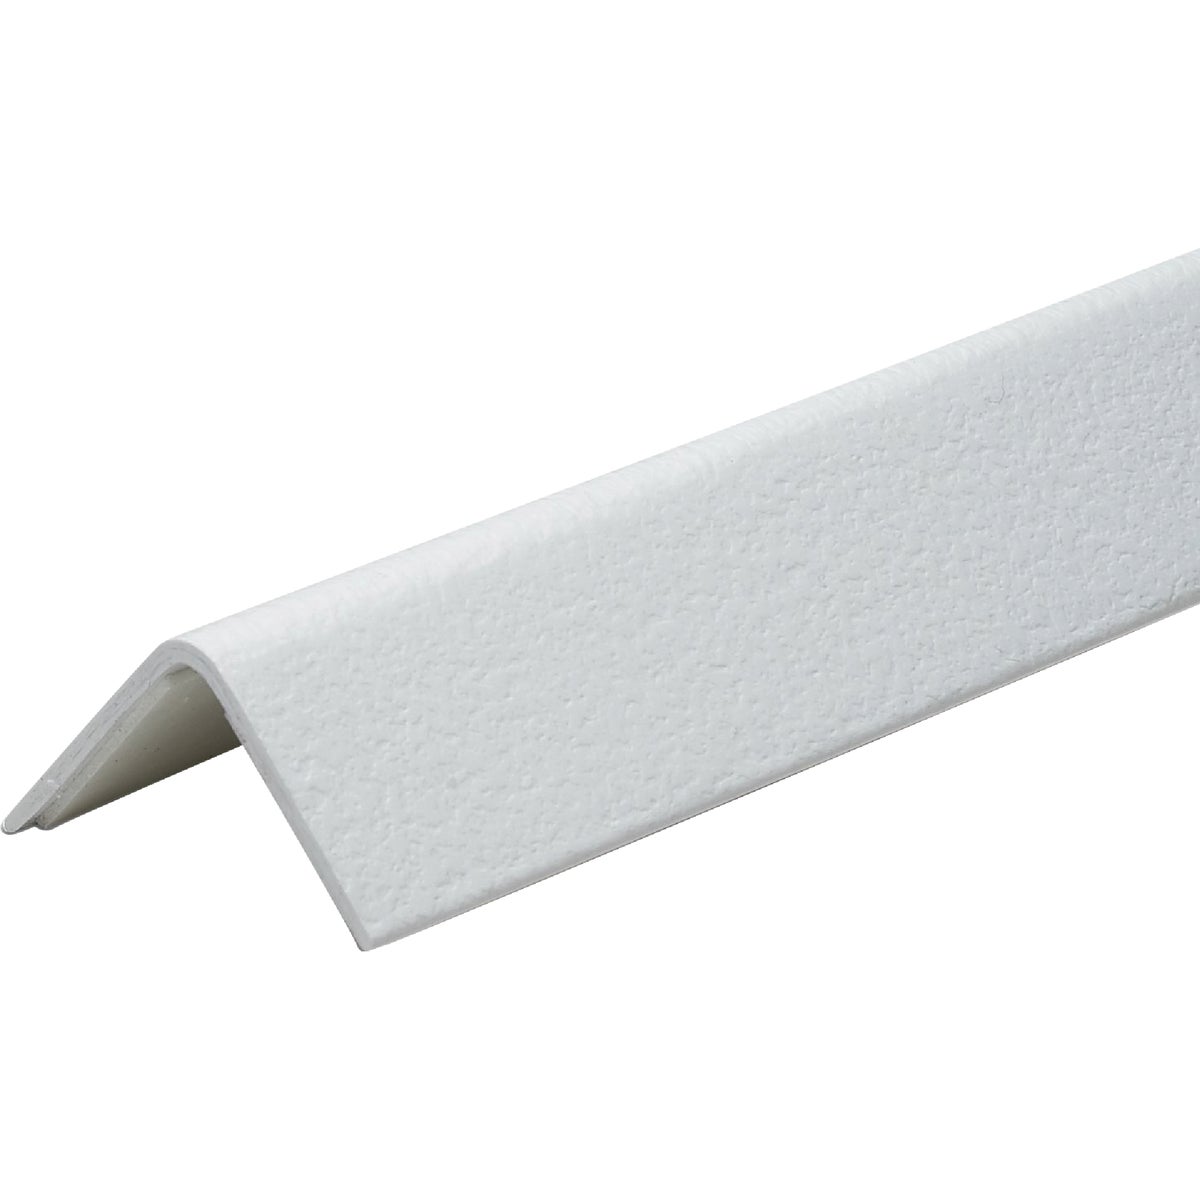 Item 794315, Paintable corner guards are made from a tough, plastic resin.